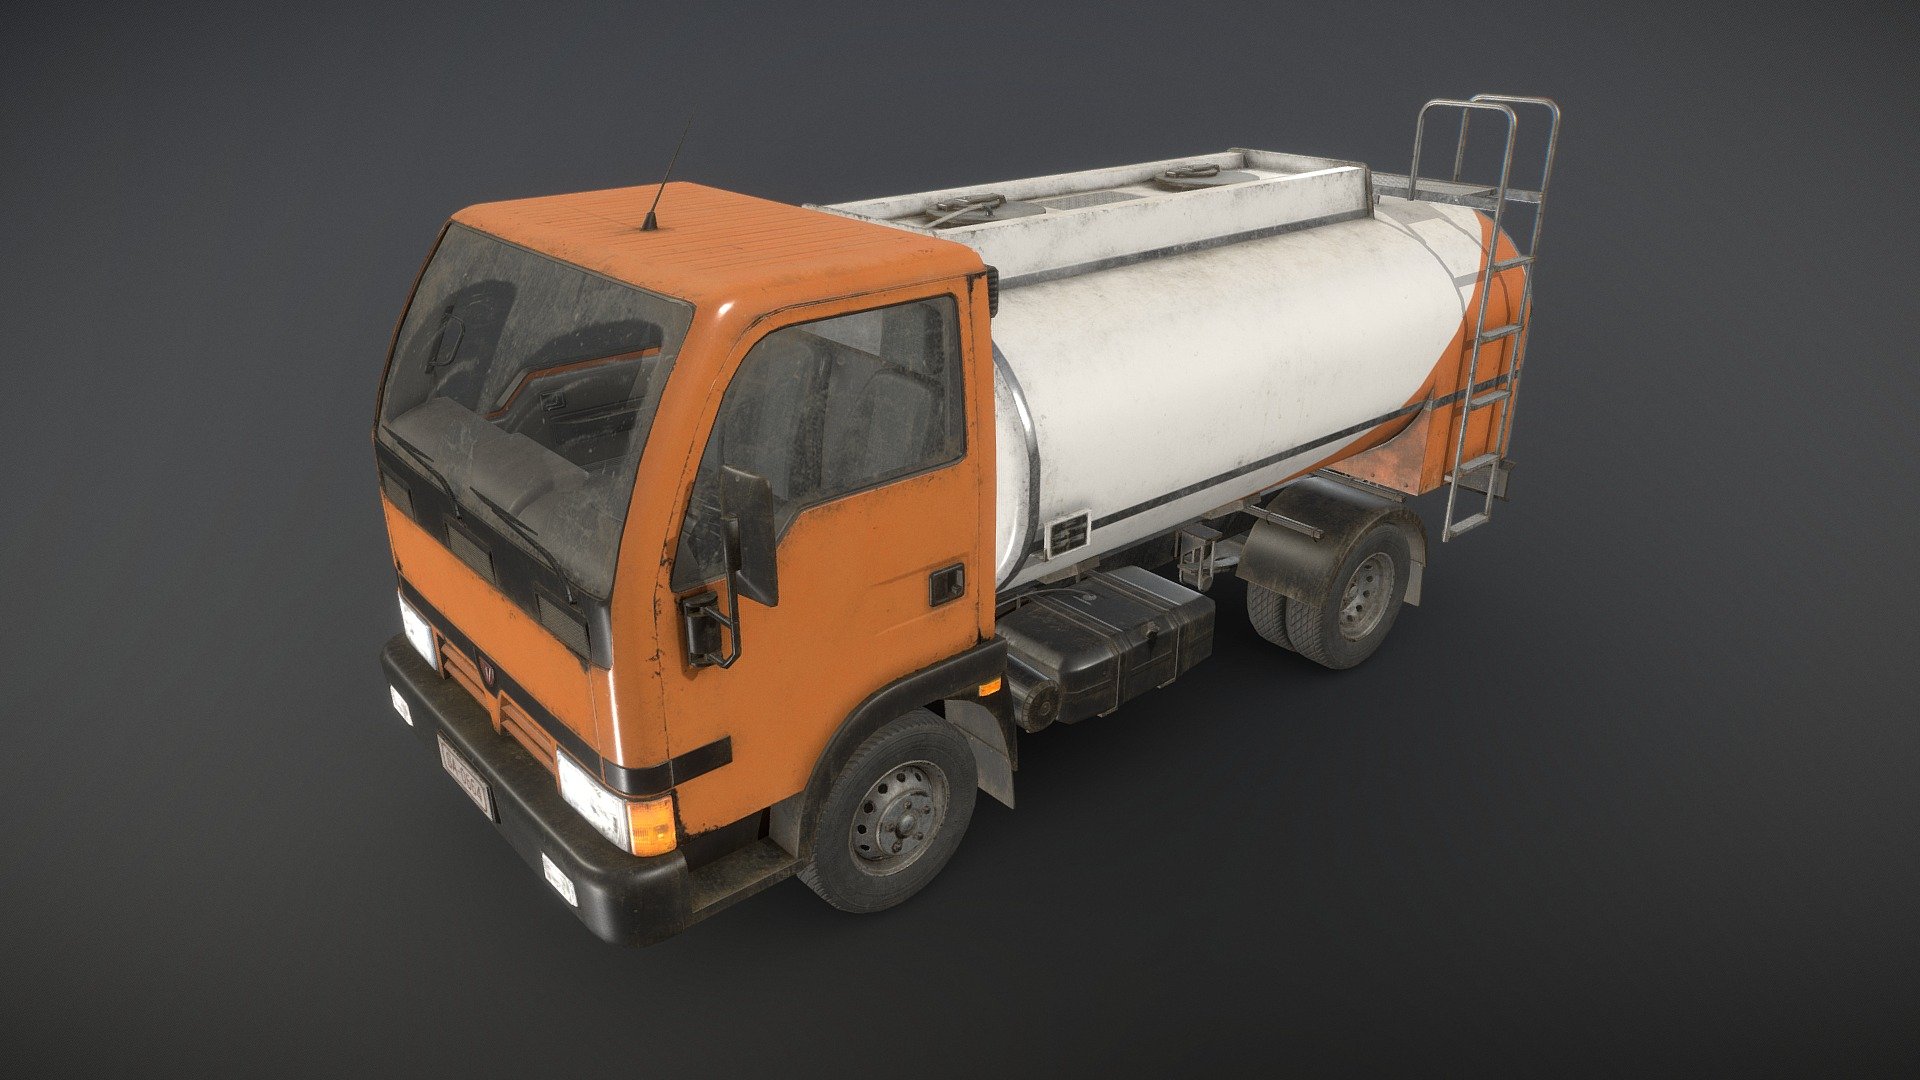 Cistern Light Truck Game-Ready model with 2 sets of PBR textures included: clean and dirty

The model is low poly (25.307 Tris), gameready and has cabin doors and wheels ready to animate (not animated):




Real-world scale and centered.

The unit of measurement used for the model is centimeters

Polys: 13.033 (Converted to triangles: 25.307)

Cabin interior fully modeled and textured.

Chassis fully detailed. Tank can be detached if needed.

All Doors, wheels, and steering wheel can be easily rigged/animated.

Textured in Substance Painter

All branding and labels are custom made.

Maps sizes: 




Chassis: 4096x4096

Interior: 2048x2048

Windows: 1024x1024

Cistern: 4096x4096

Provided Maps (cleand and dirty):




Albedo

Normal

Roughness

Metalness

AO

Opacity included in Albedo (windows)

Emissive

Formats Incuded - MAX / BLEND / OBJ / FBX / 3DS

This model can be used for any game, film, personal project, etc. You may not resell or redistribute any content - Light Truck Cistern - Low Poly - Buy Royalty Free 3D model by MSWoodvine 3d model